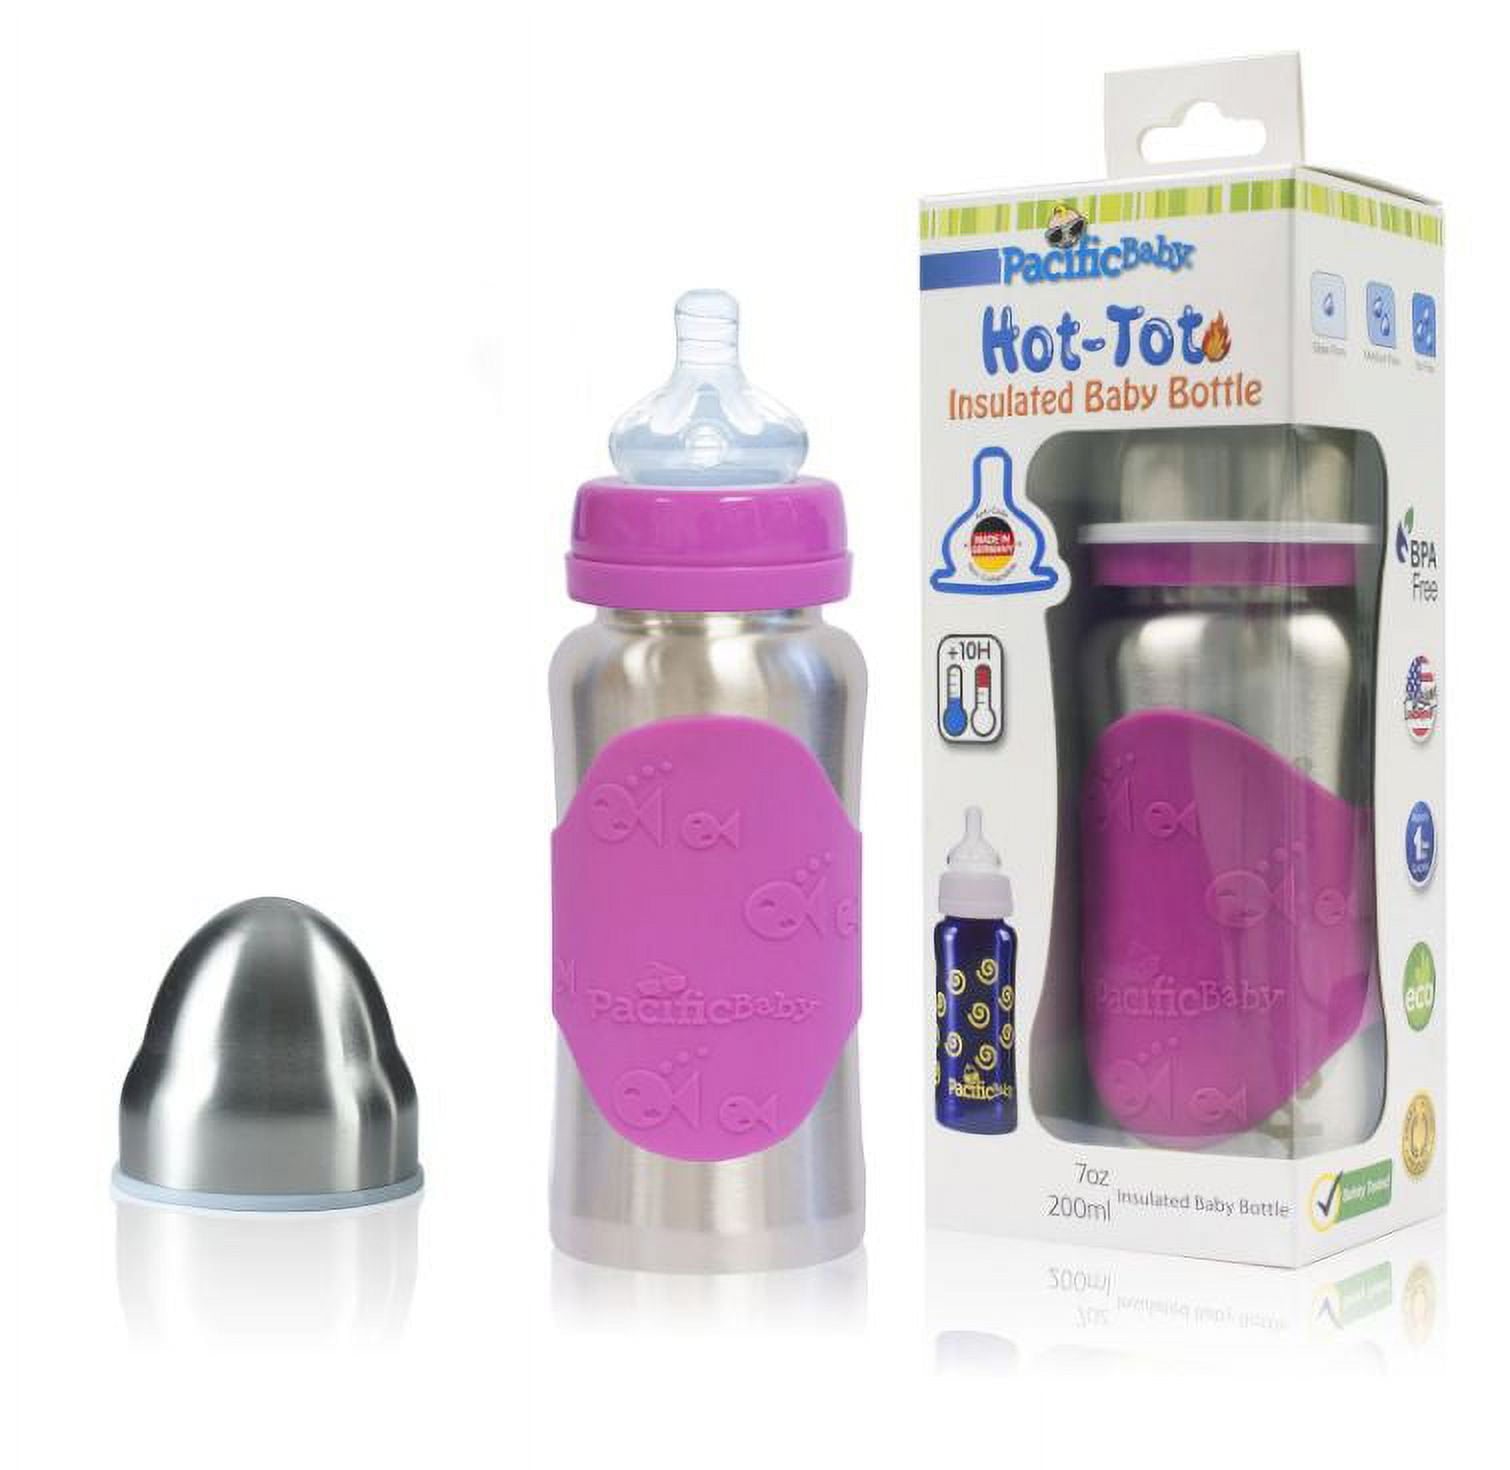 Pacific Baby Hot-Tot 7oz Stainless Steel Insulated Infant Baby